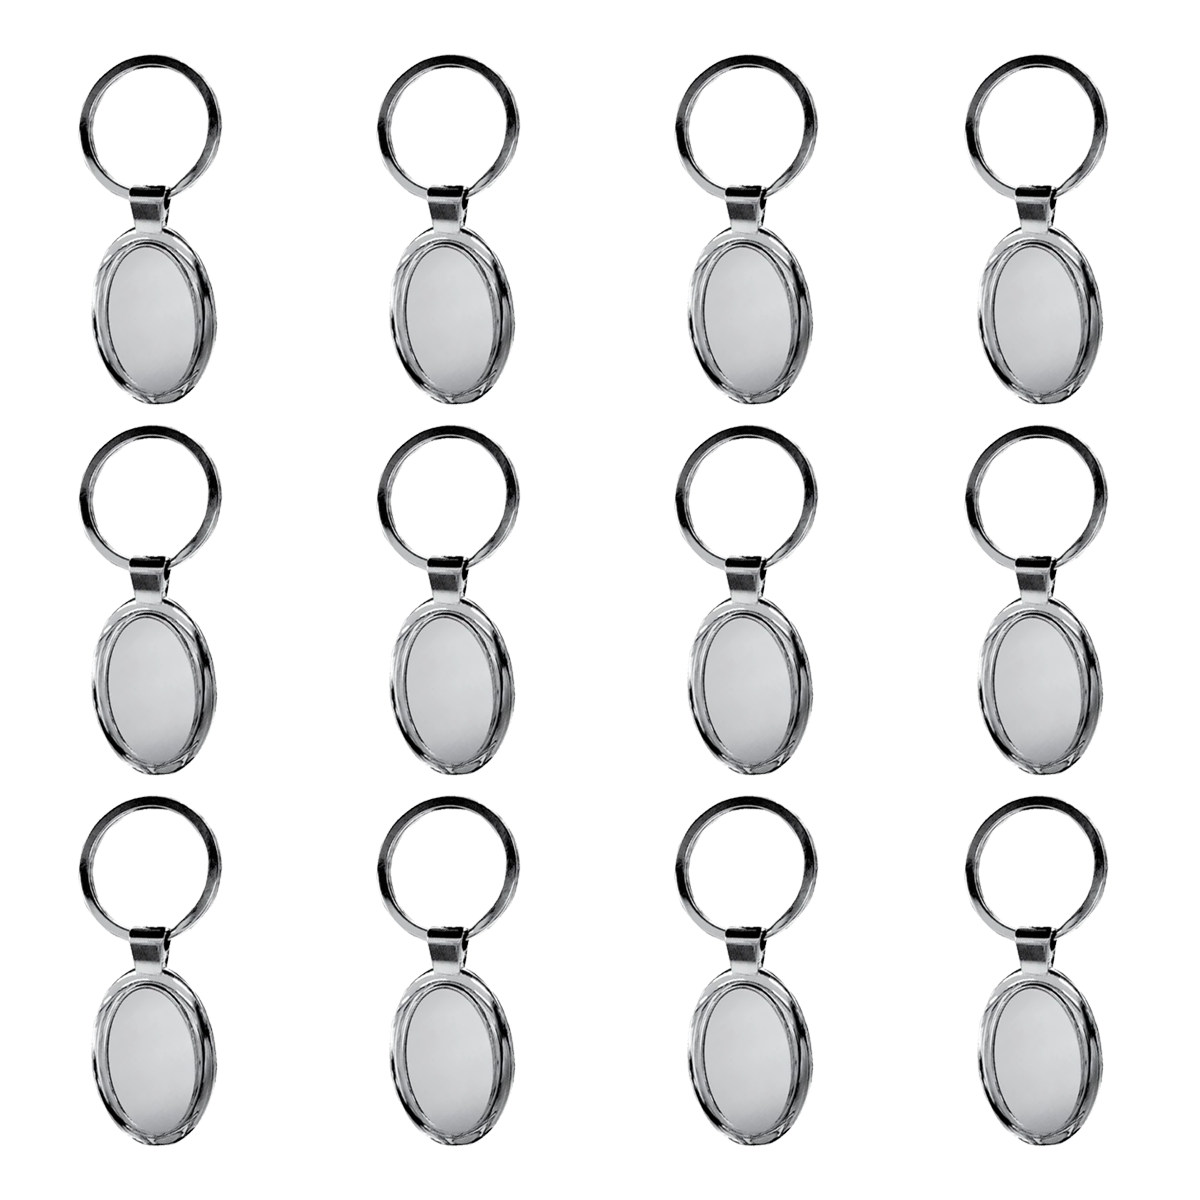 Olmecs Promotional Oval Shaped Metal Keychain (12 Pc Pack)